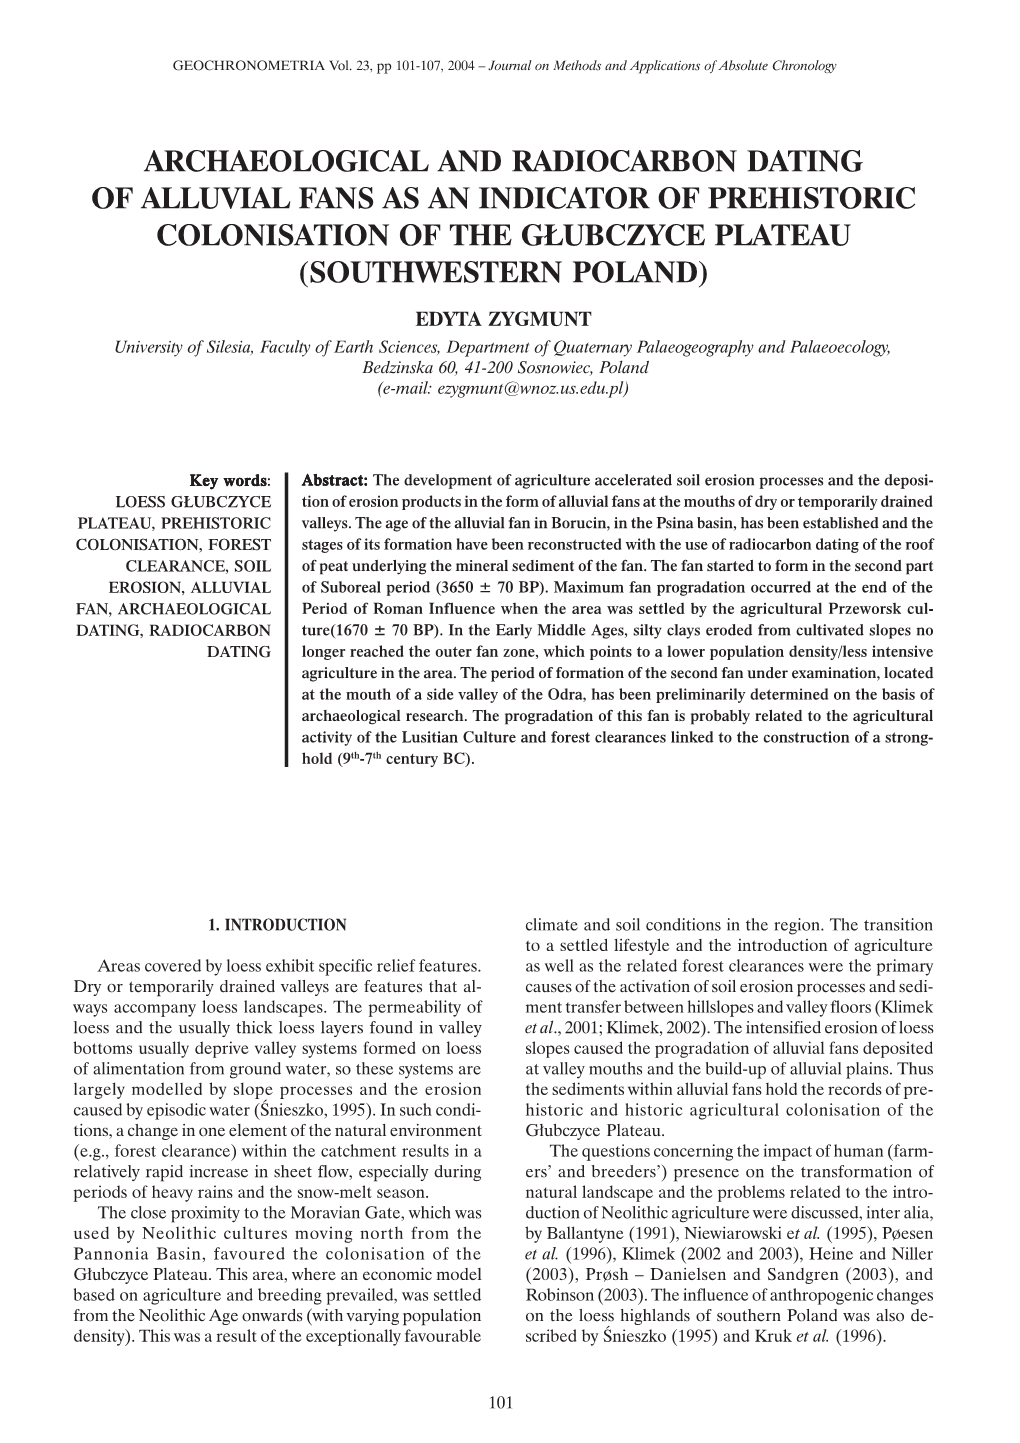 Archaeological and Radiocarbon Dating of Alluvial Fans As an Indicator of Prehistoric Colonisation of the G£Ubczyce Plateau (Southwestern Poland)